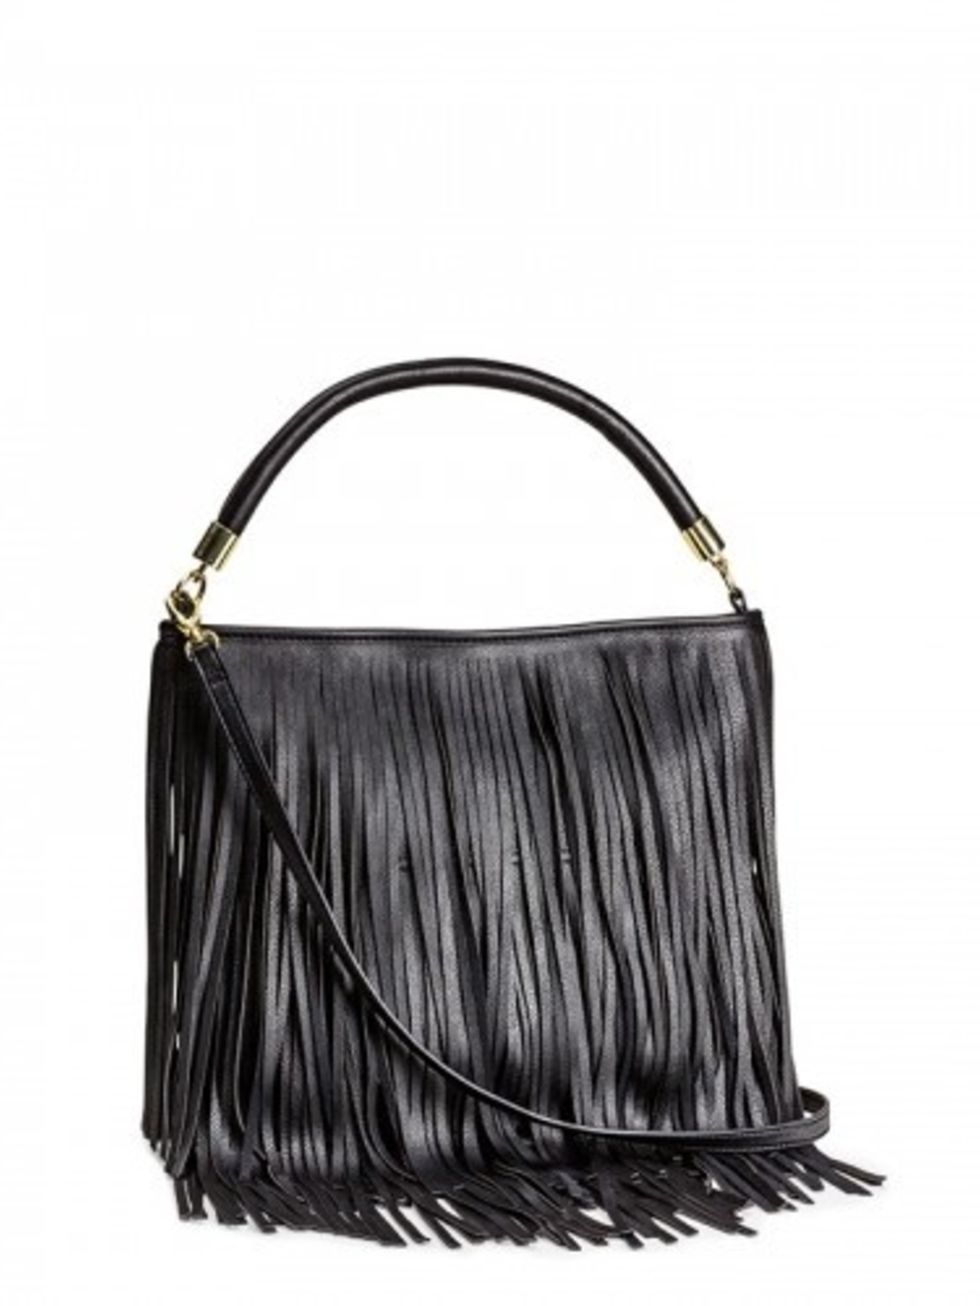 <p><a href="http://www.hm.com/gb/product/31499?article=31499-A" target="_blank">H&amp;M</a> fringe bag, &pound;19.99</p>